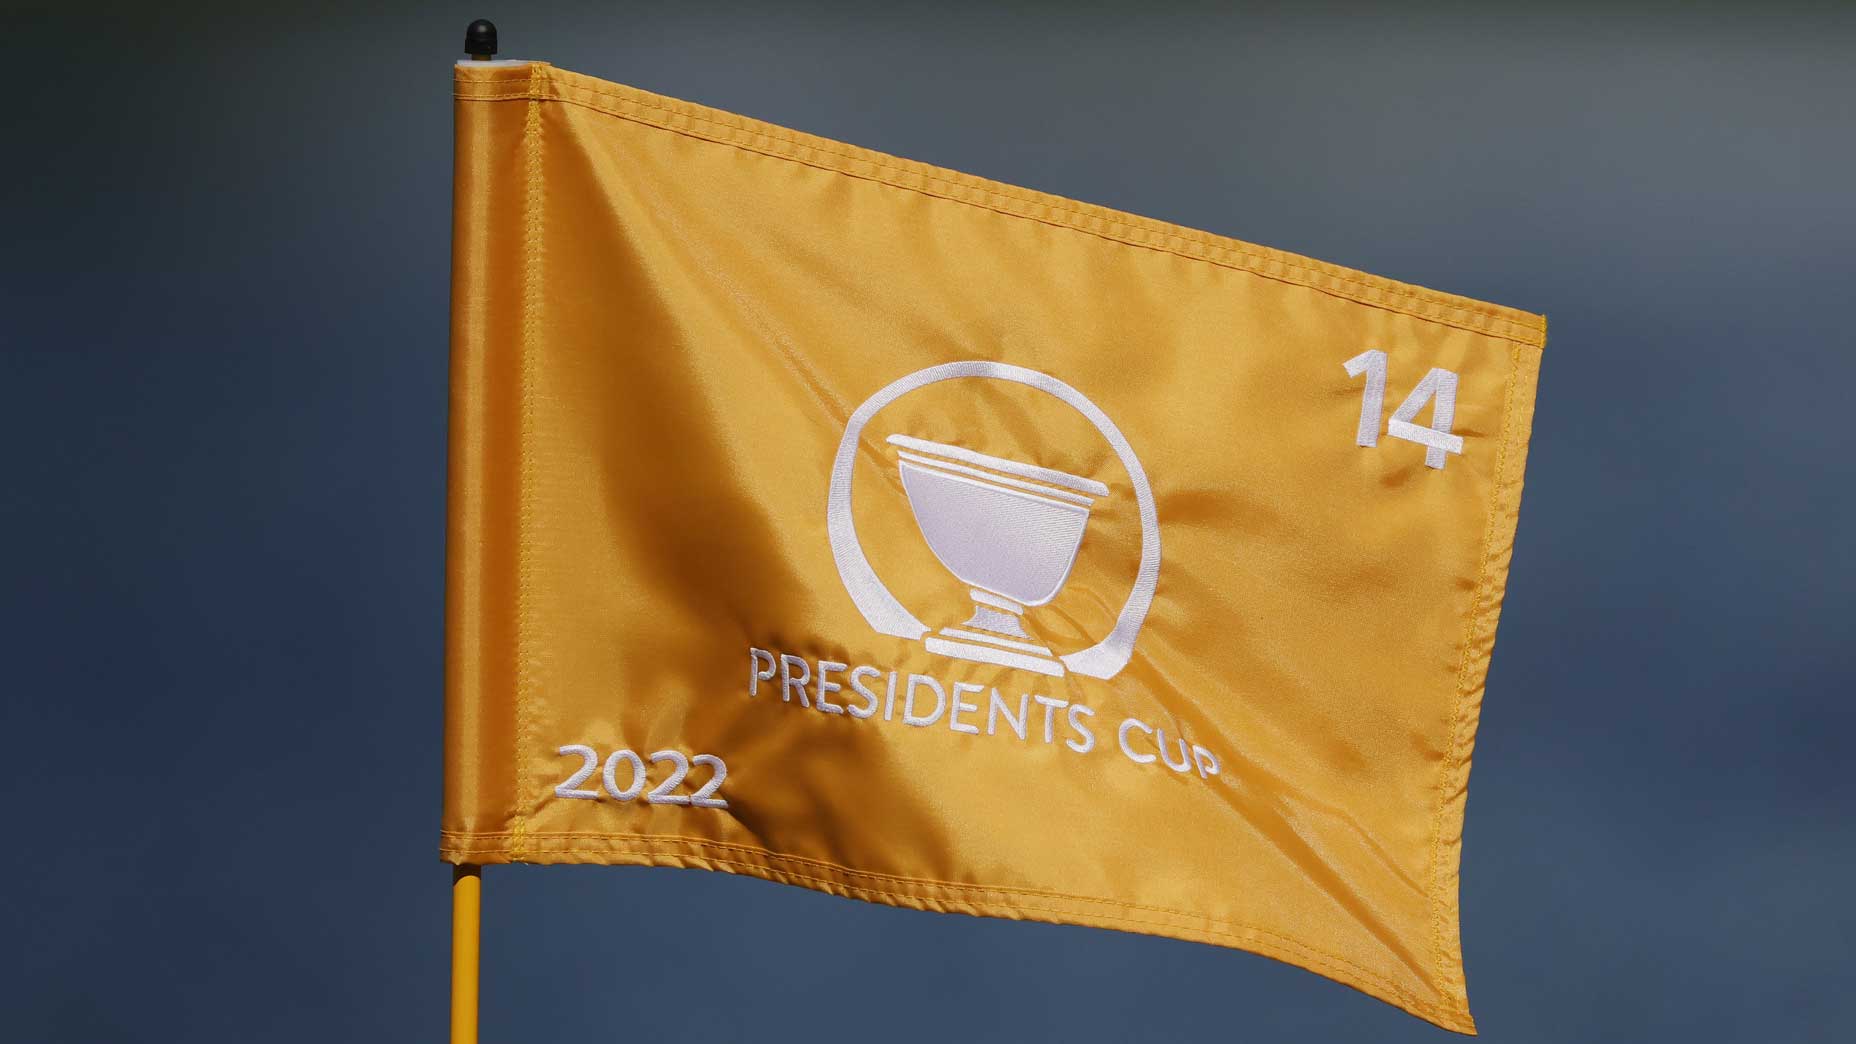 Presidents Cup flag at 2022 Presidents Cup